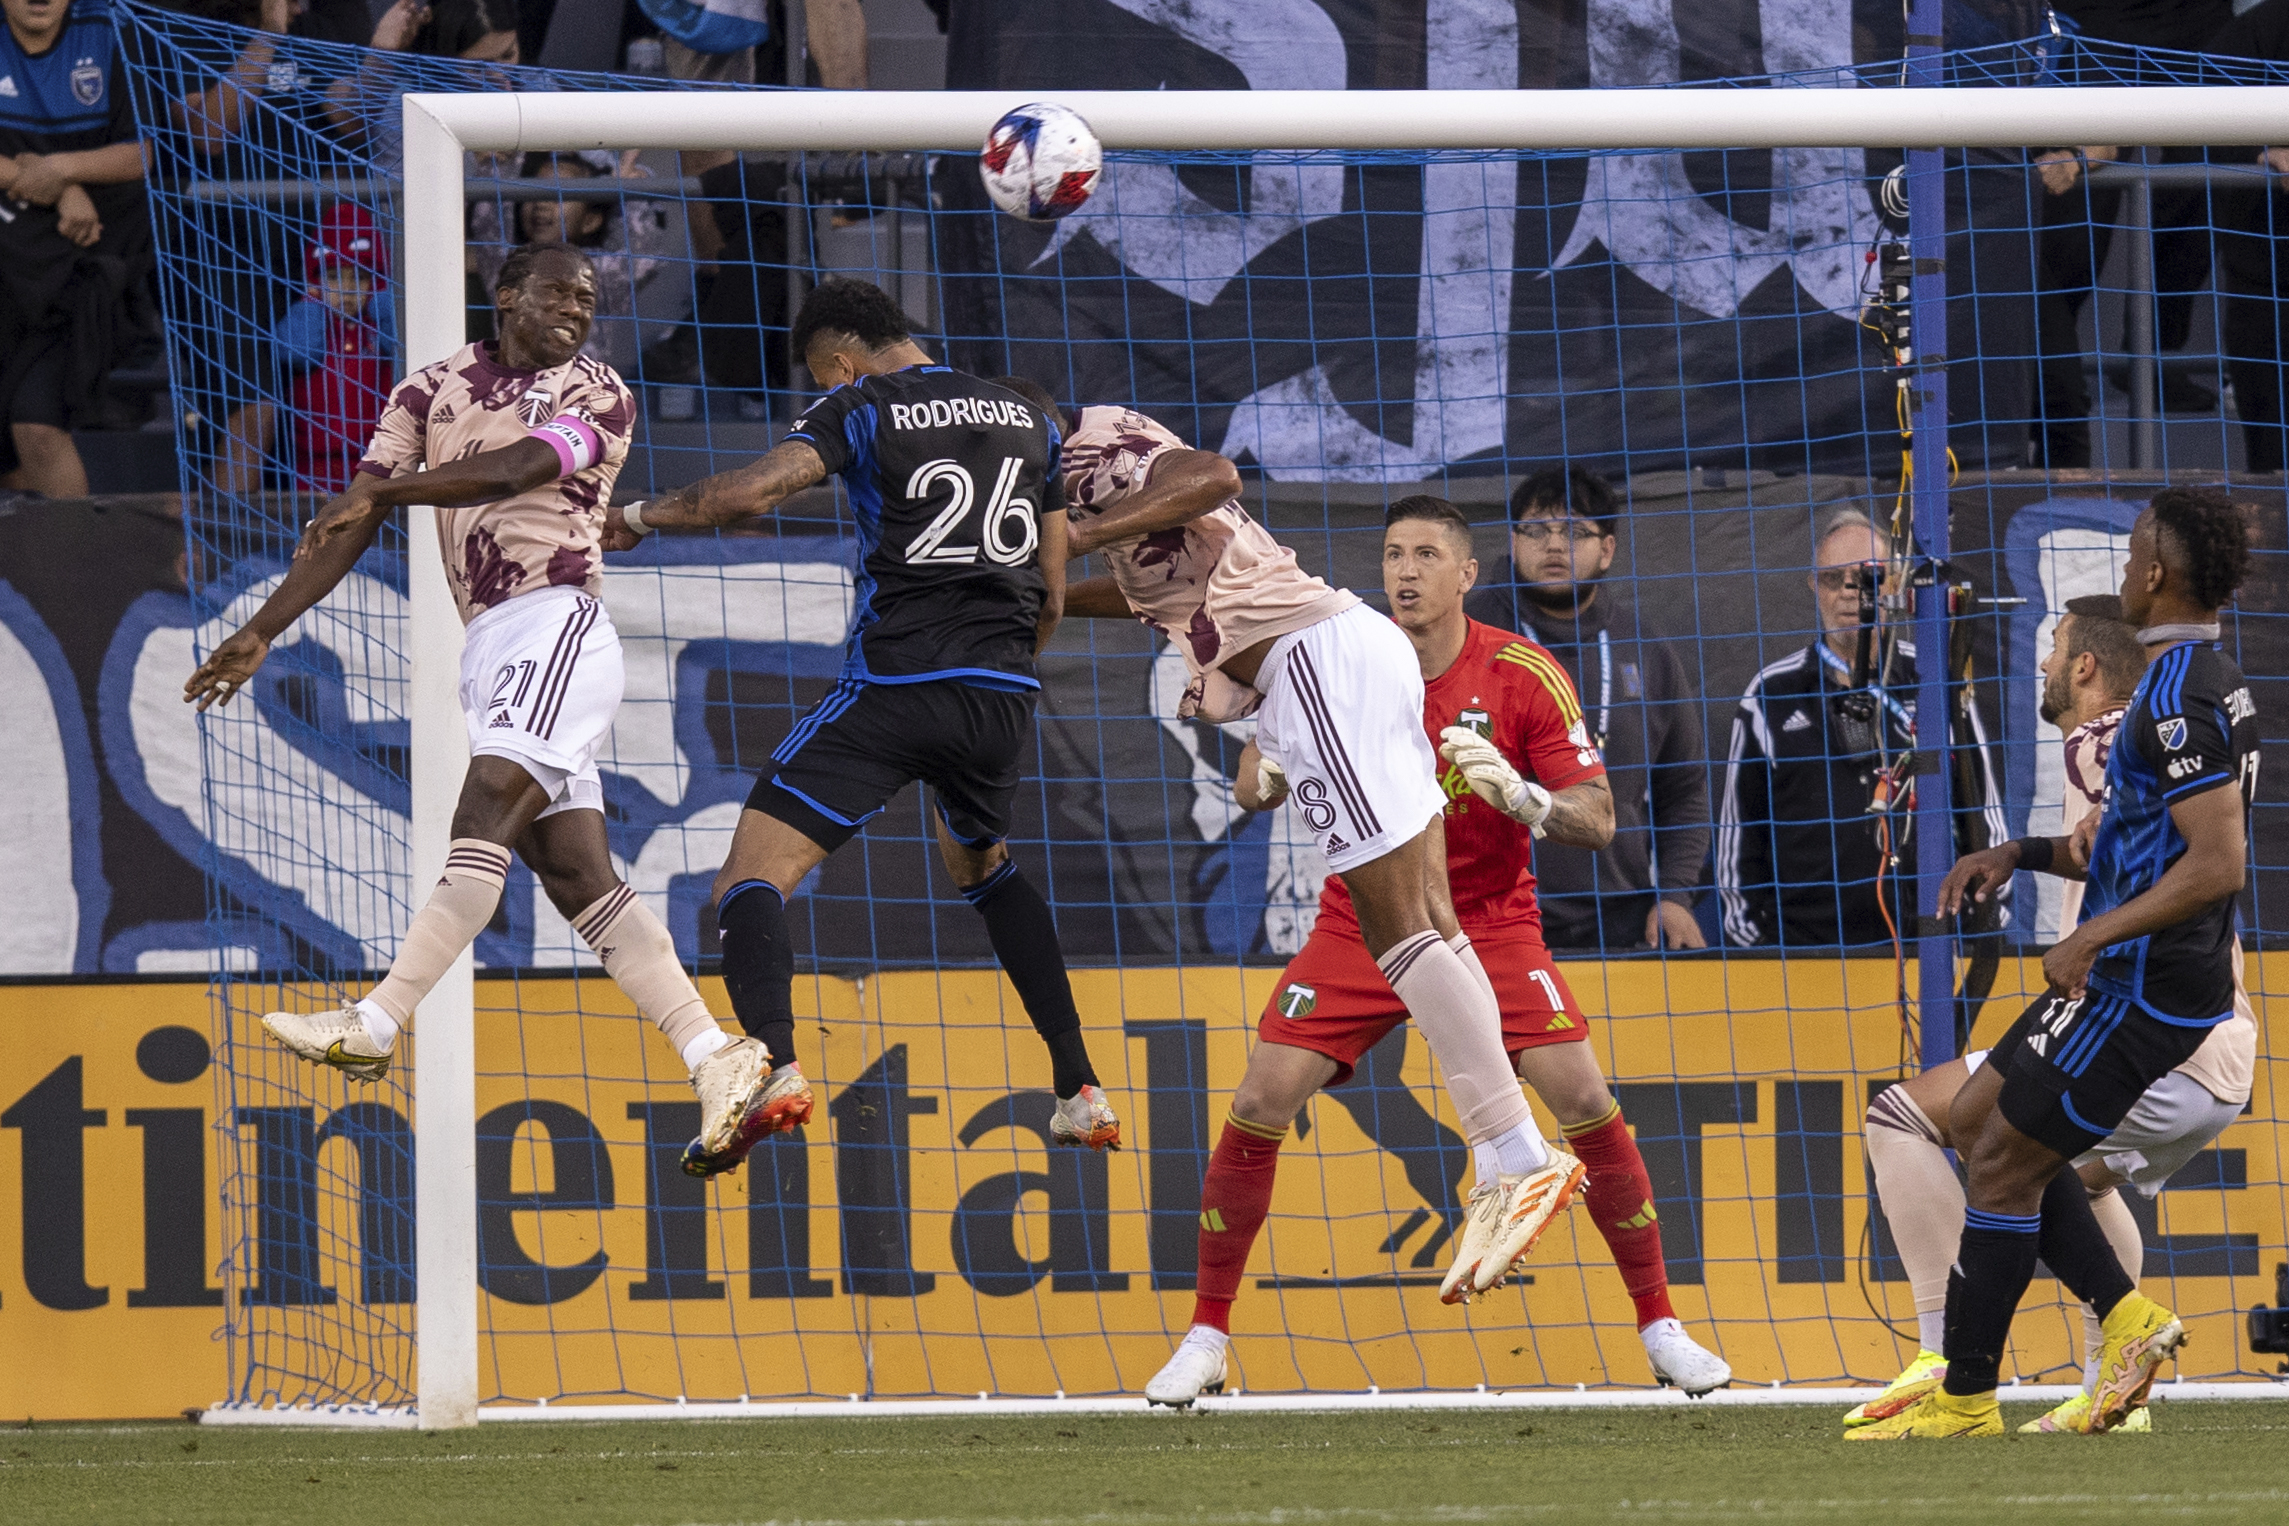 Portland Timbers midfielder Diego Chará (21) and defender Zachery McGraw (18) defend against a header by San Jose Earthquakes defender Rodrigues (26) during the first half of an MLS soccer match in San Jose, Calif., Saturday, June 17, 2023.